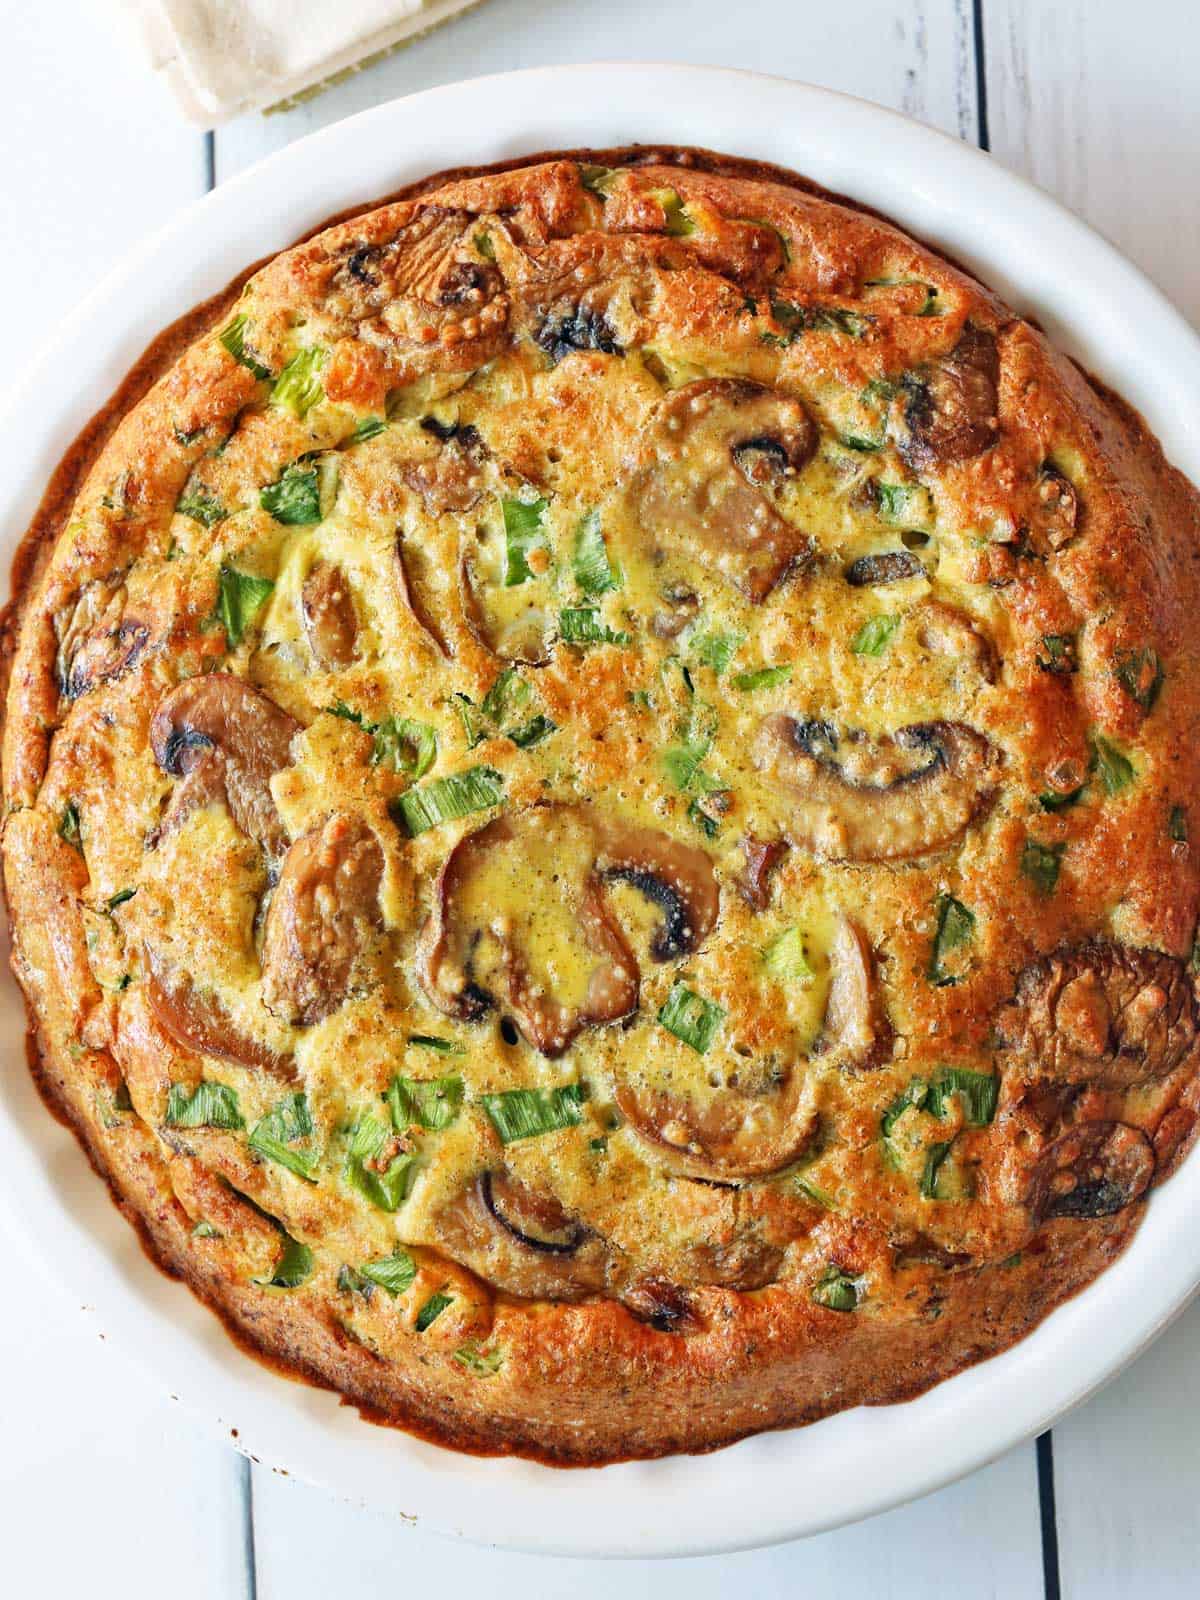 Mushroom frittata is served in a pie plate.